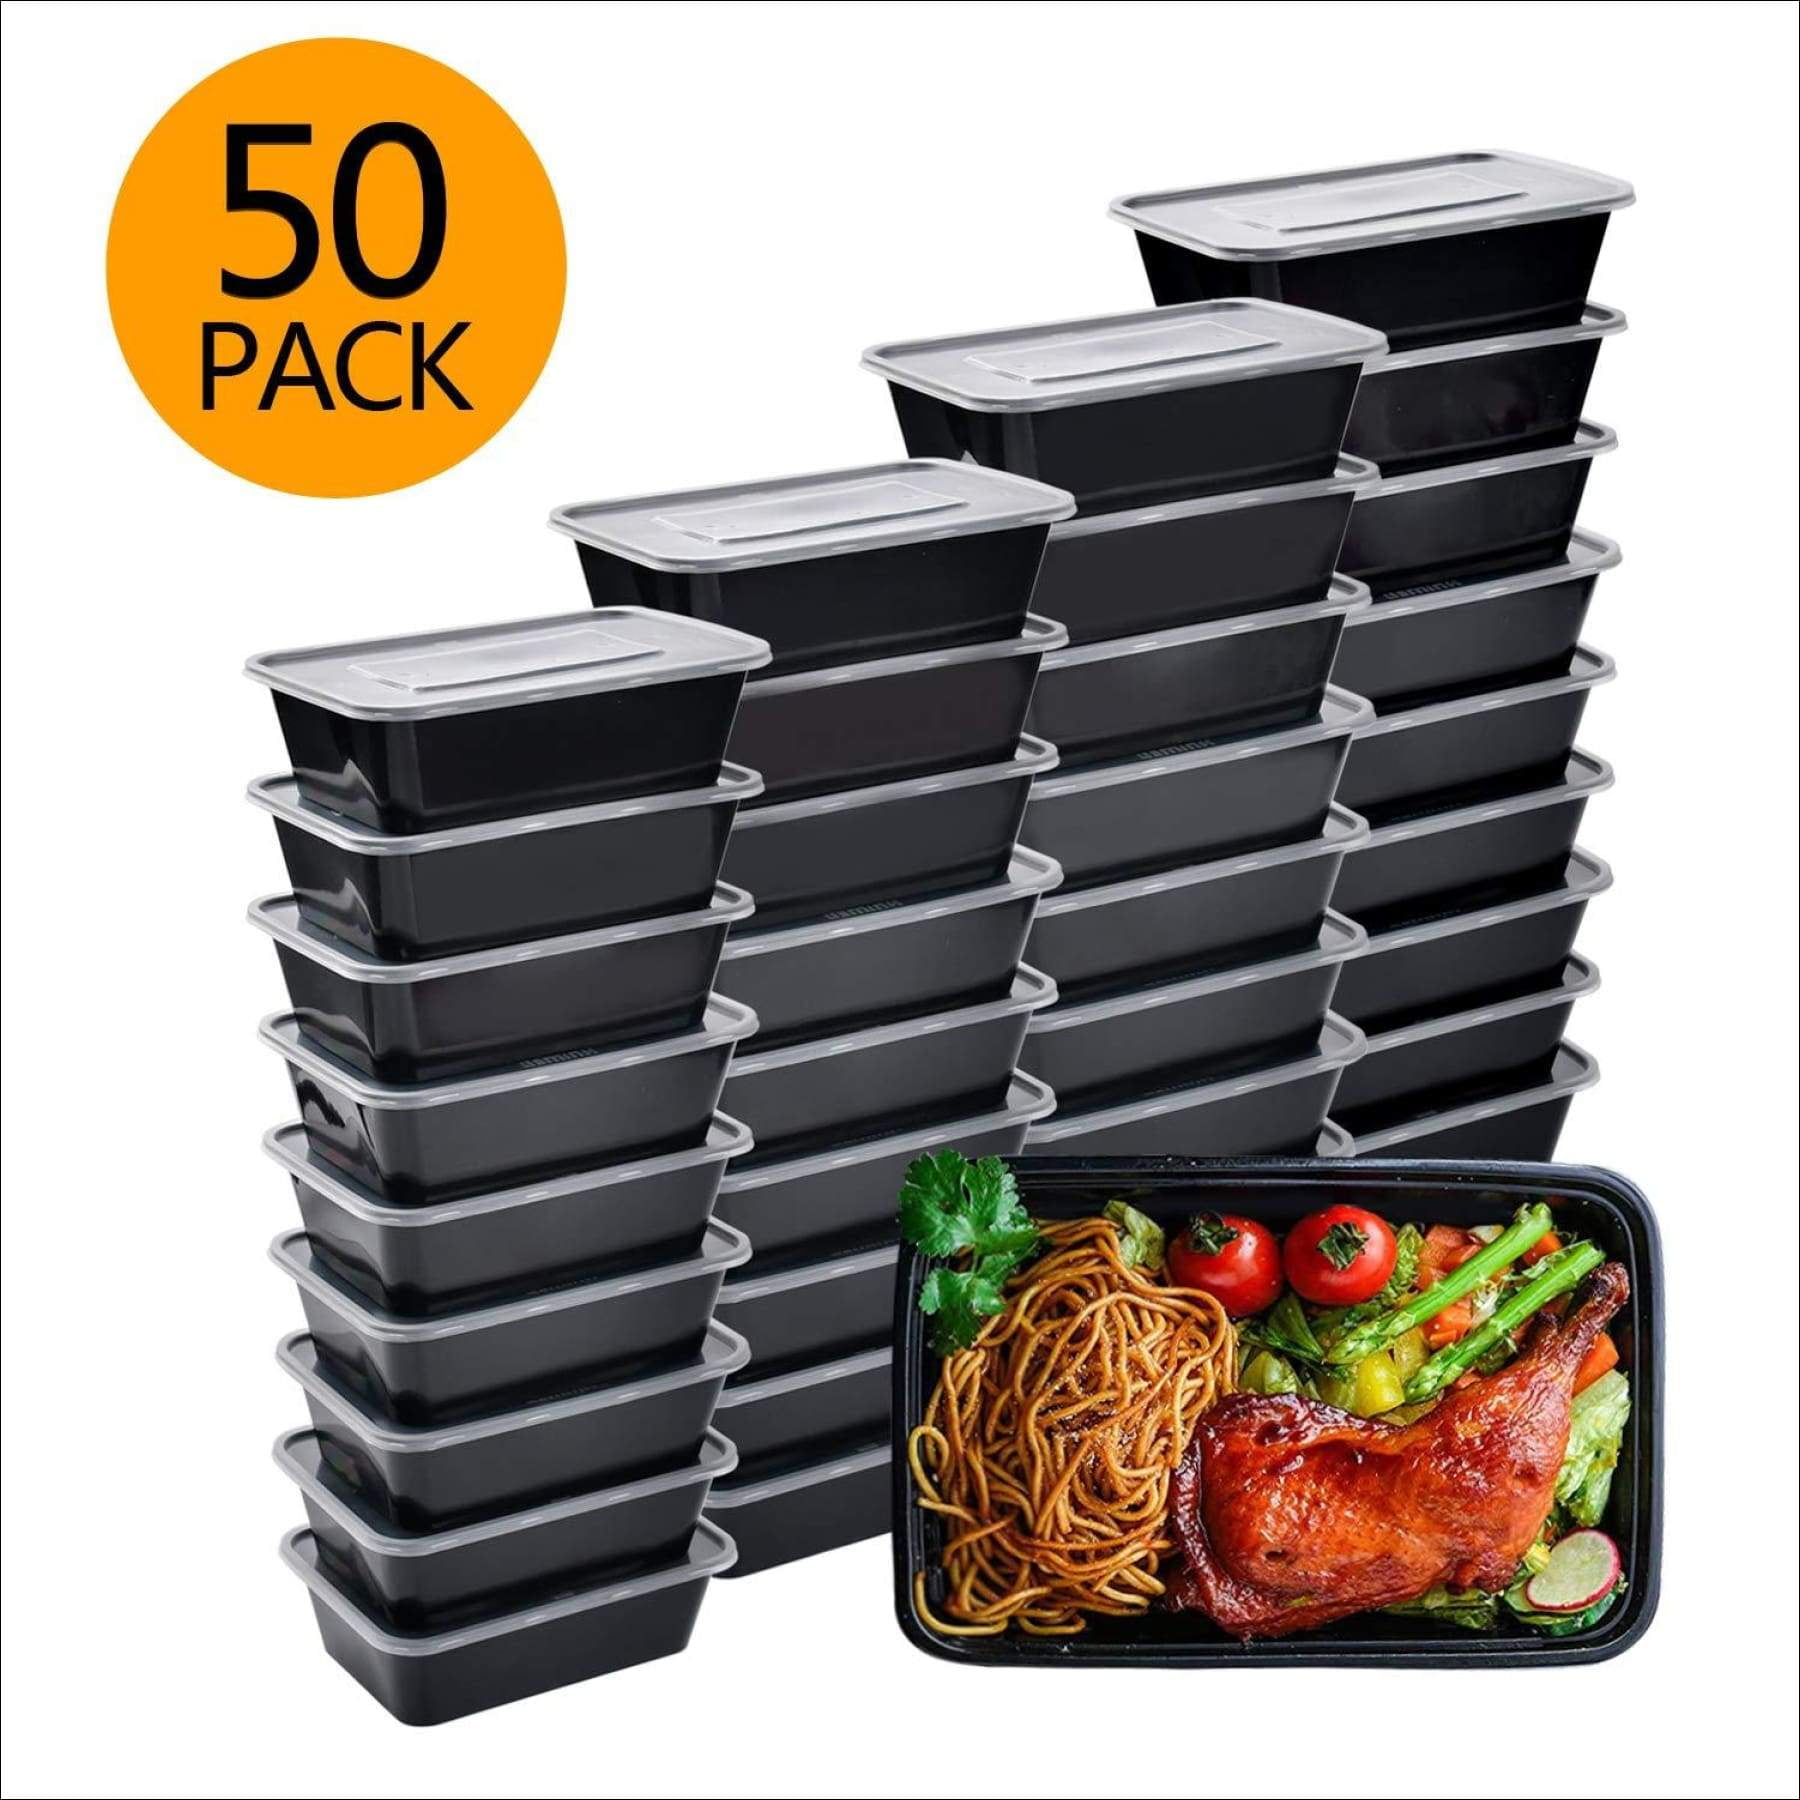 LEOBOX To Go Containers, BPA-Free Plastic Take Out Boxes with Lids 50-Pack  27oz Black Reusable Meal Prep Container for Food Storage Takeout, Hinged